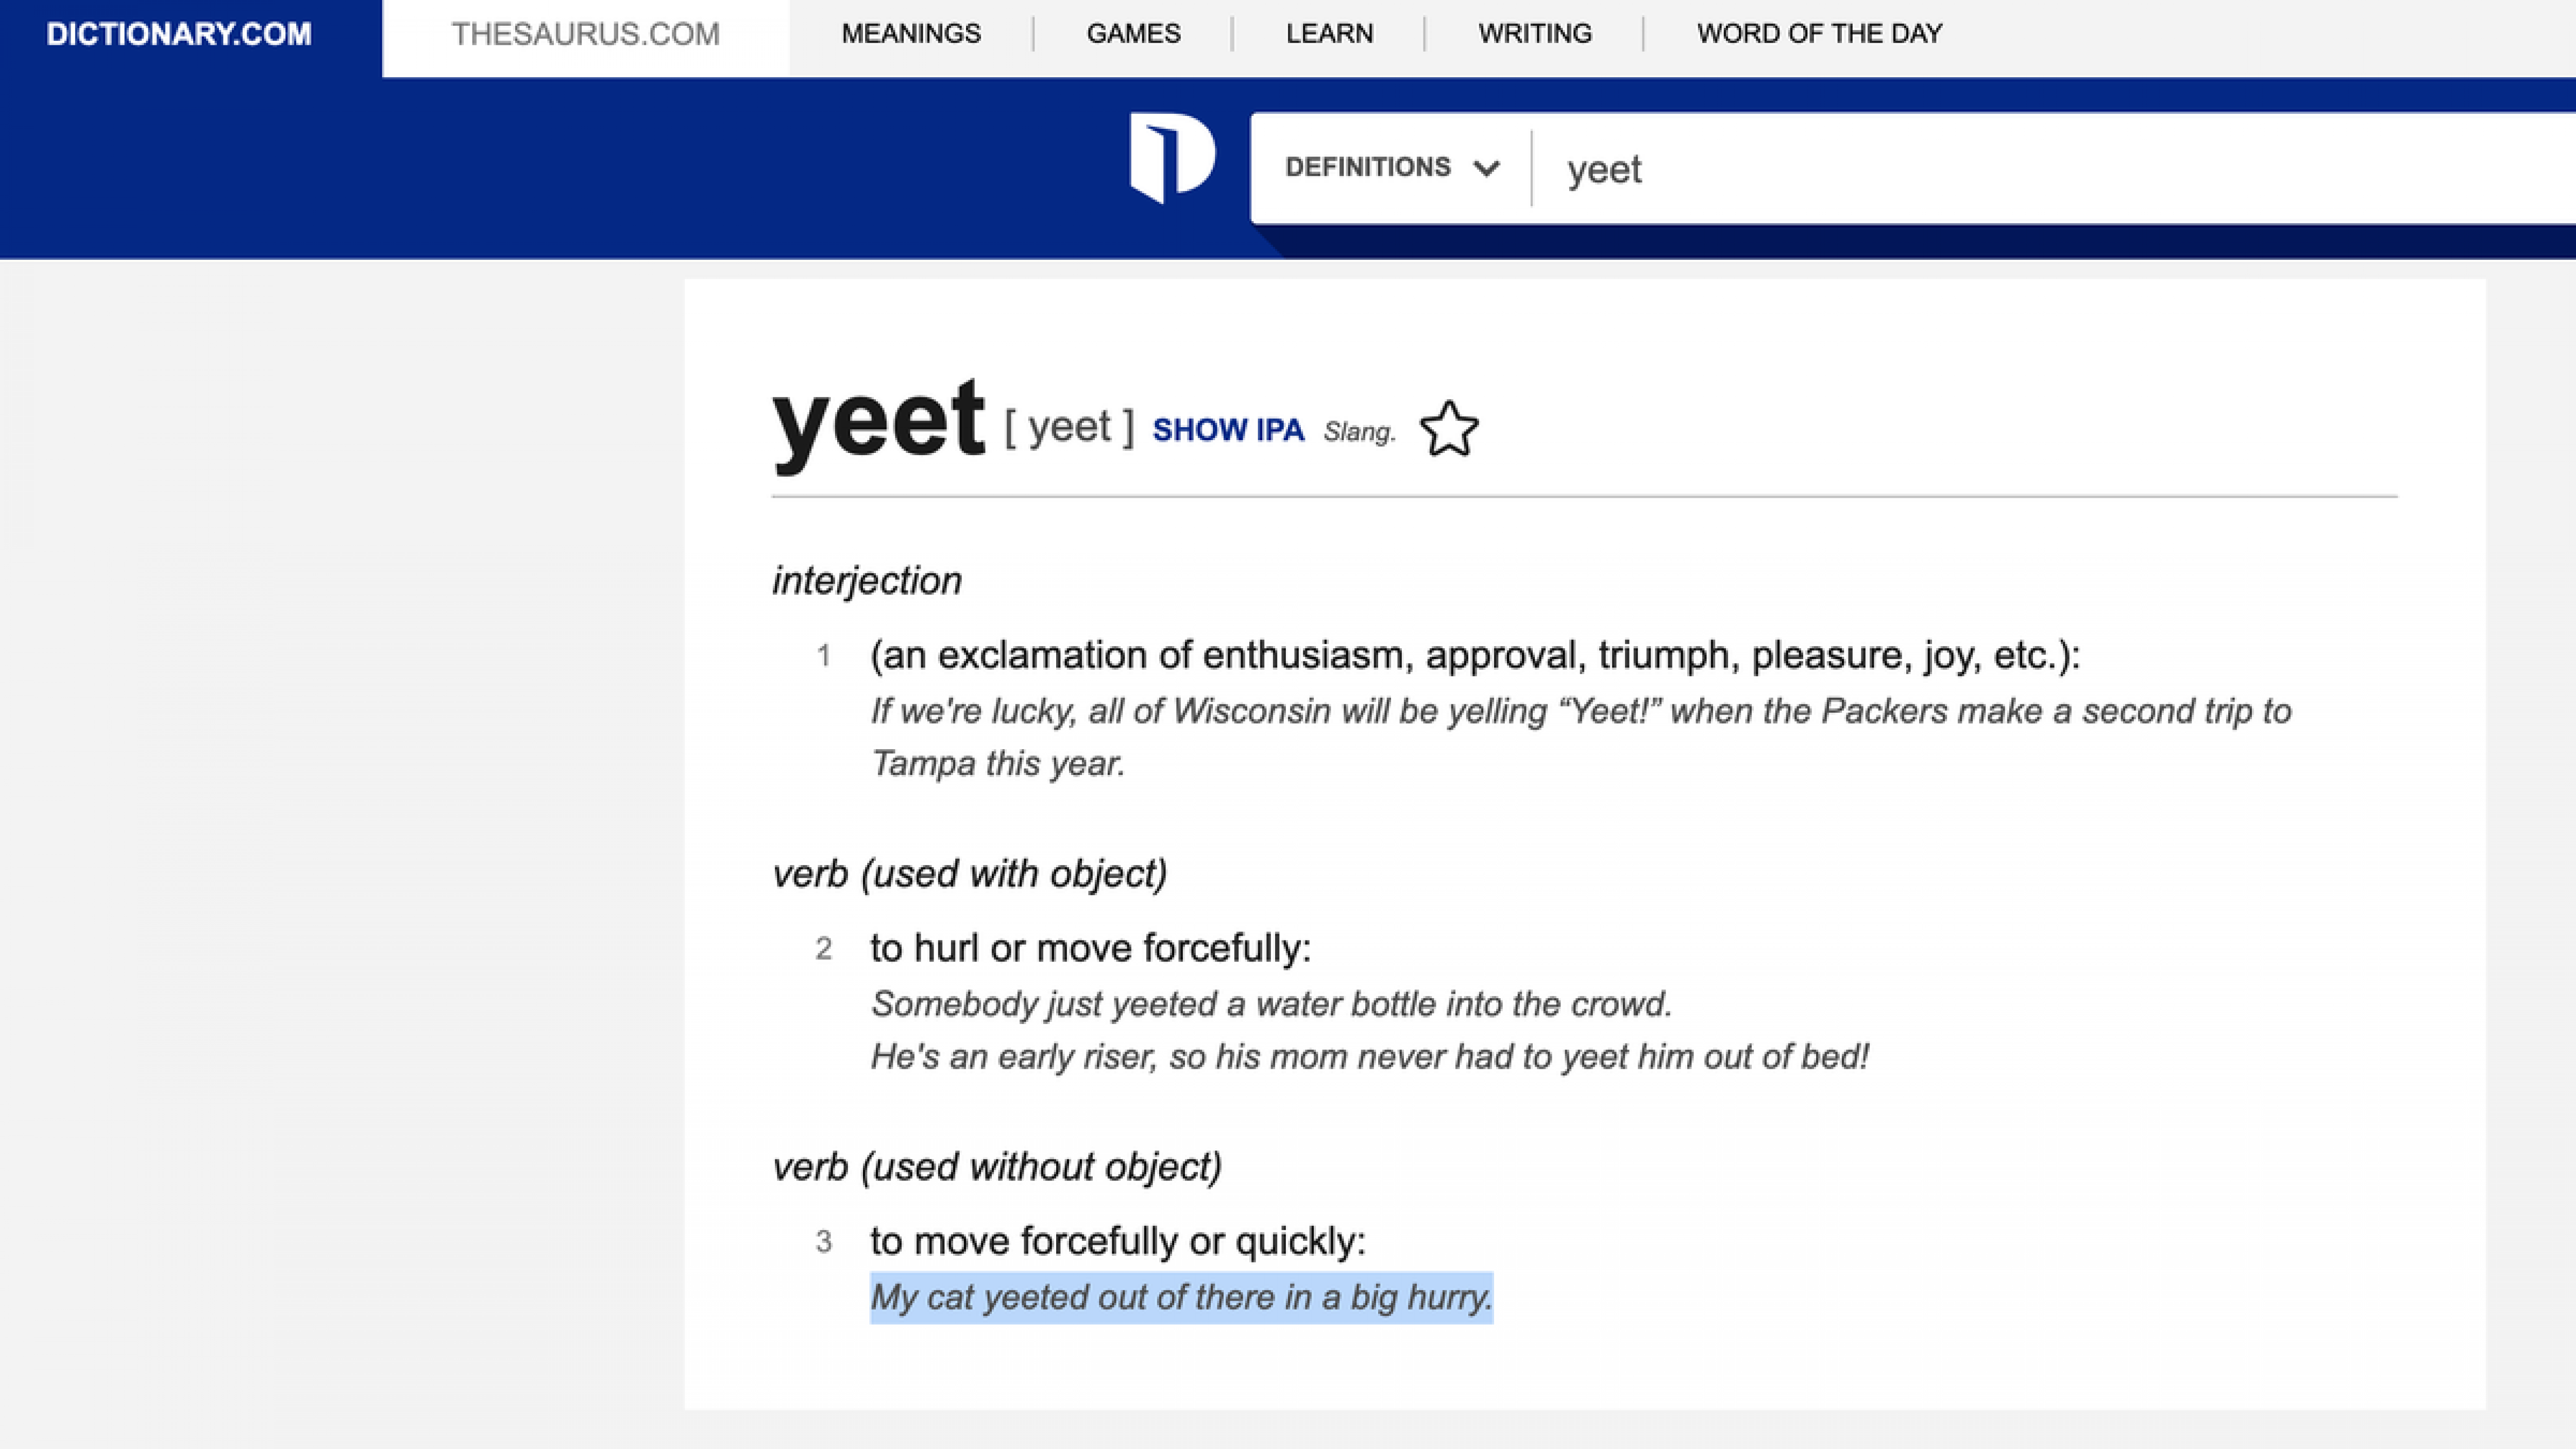 Olds, Now You Can Look Up ‘Yeet’ in the Dictionary Instead of Asking the Youth